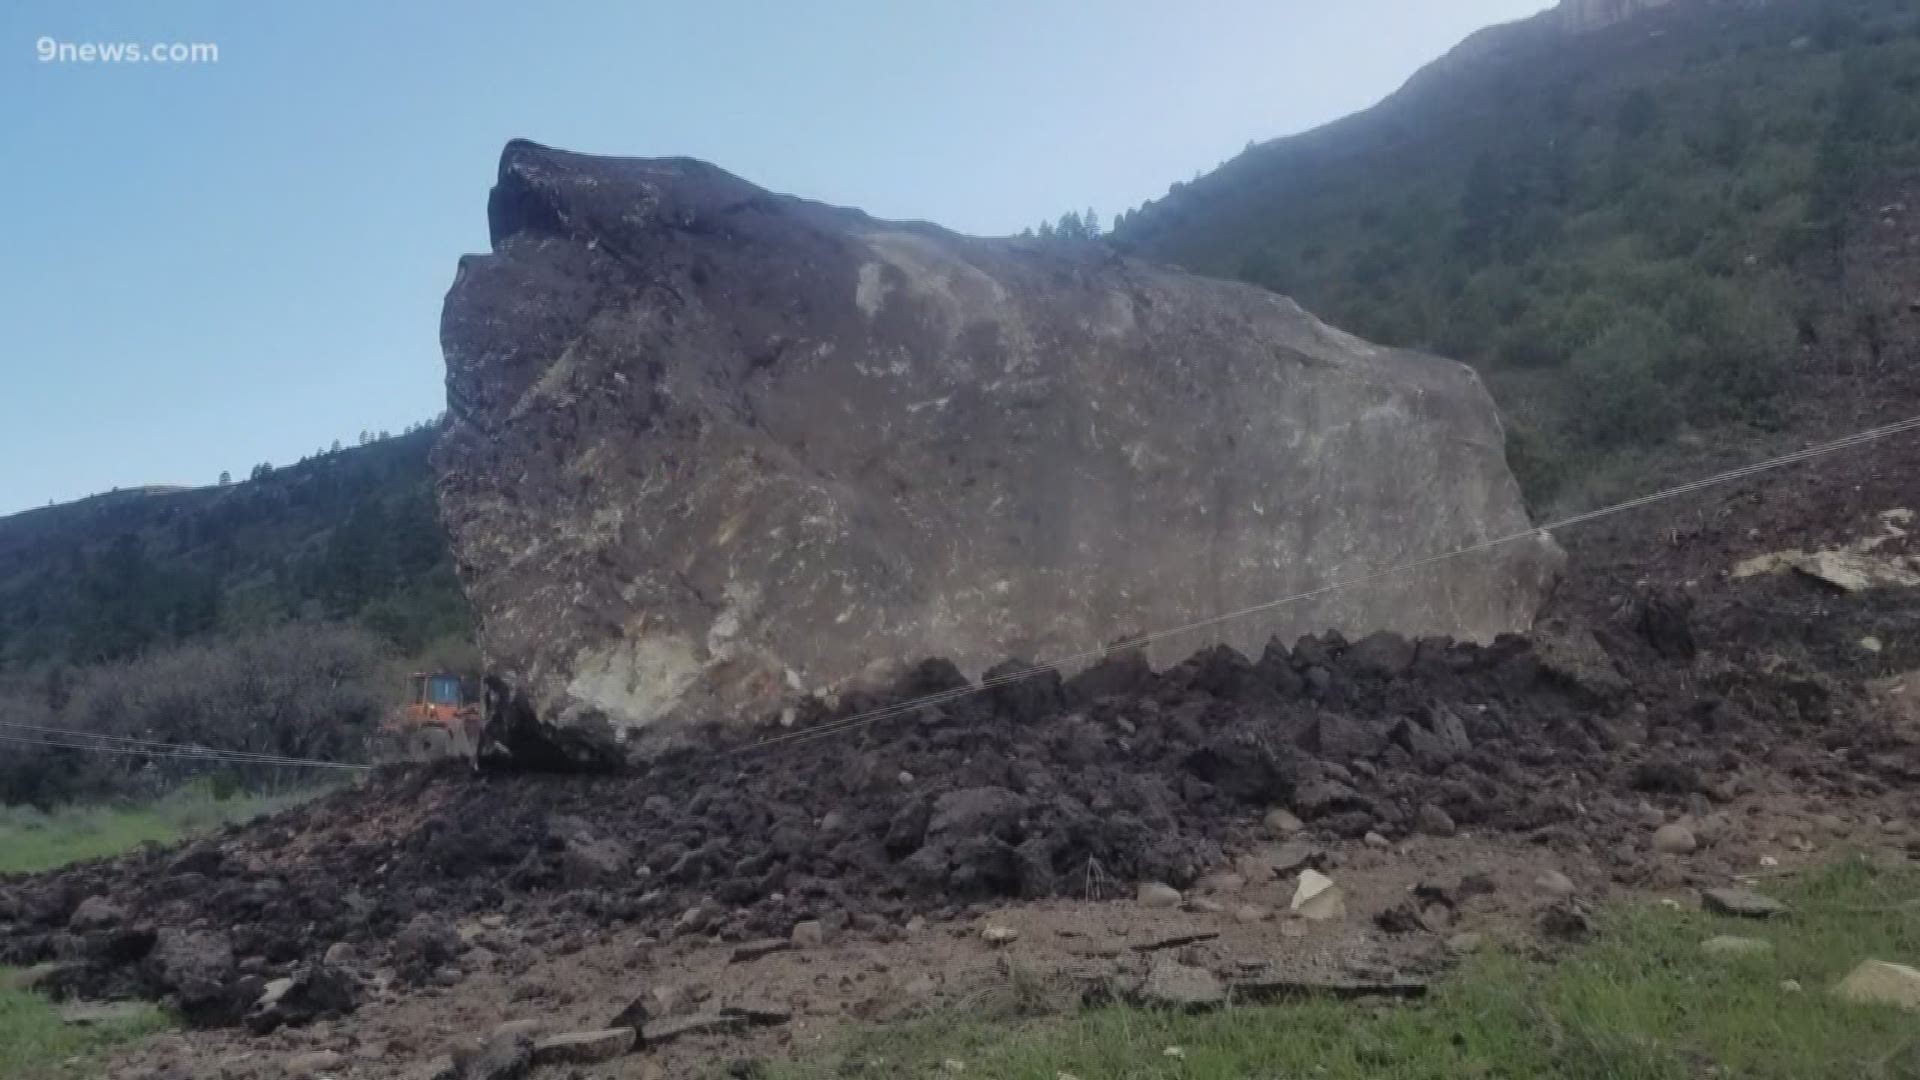 The massive boulder that is estimated to be the size of a building will now and forever be called Memorial Rock.